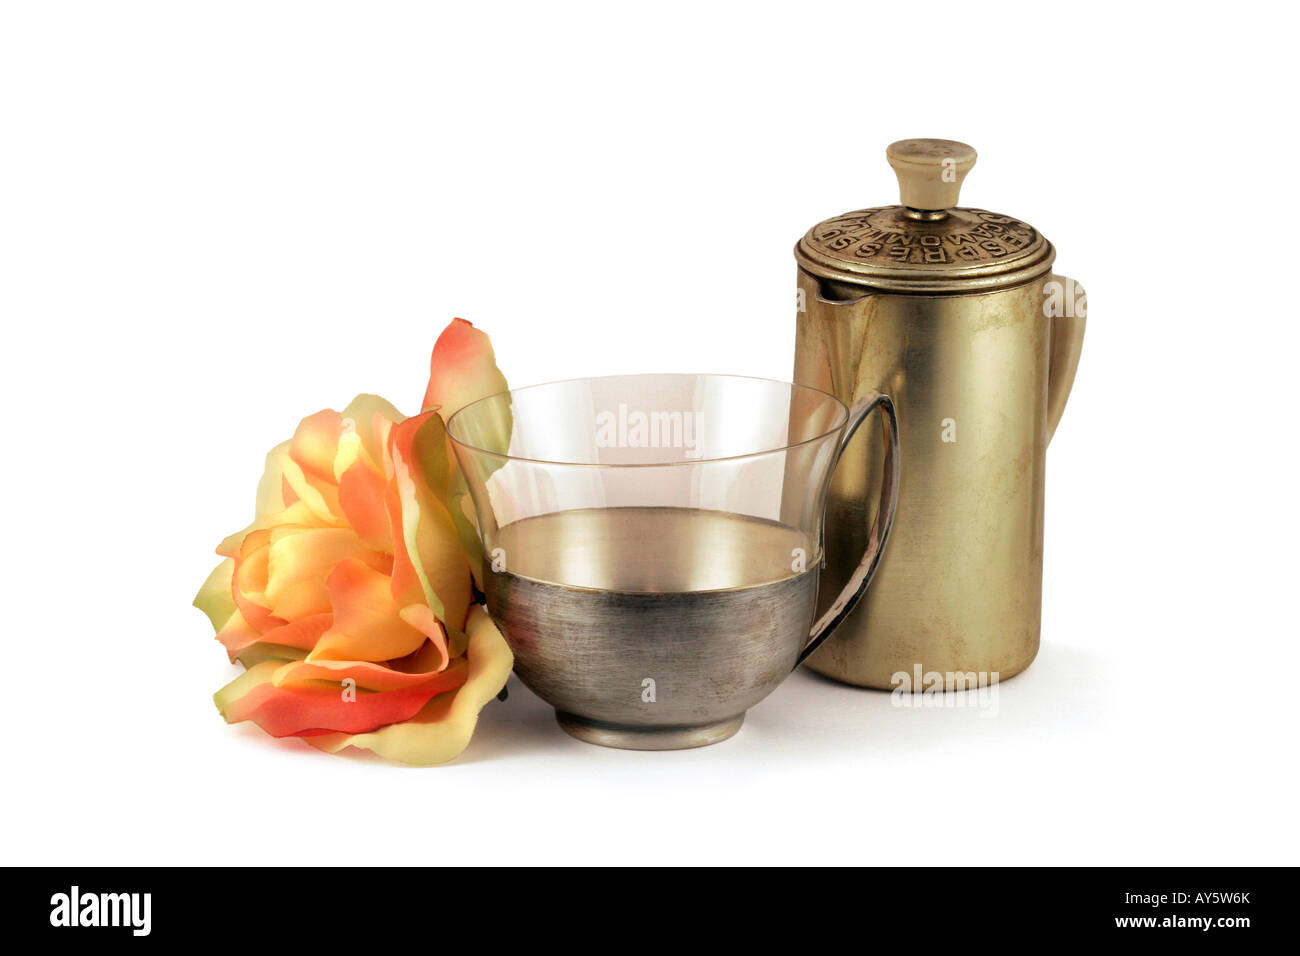 A still life with old-fashion: ancient italian objects. A silver-glass tea cup, an aluminium coffee-jug and a gentle flower. Stock Photo